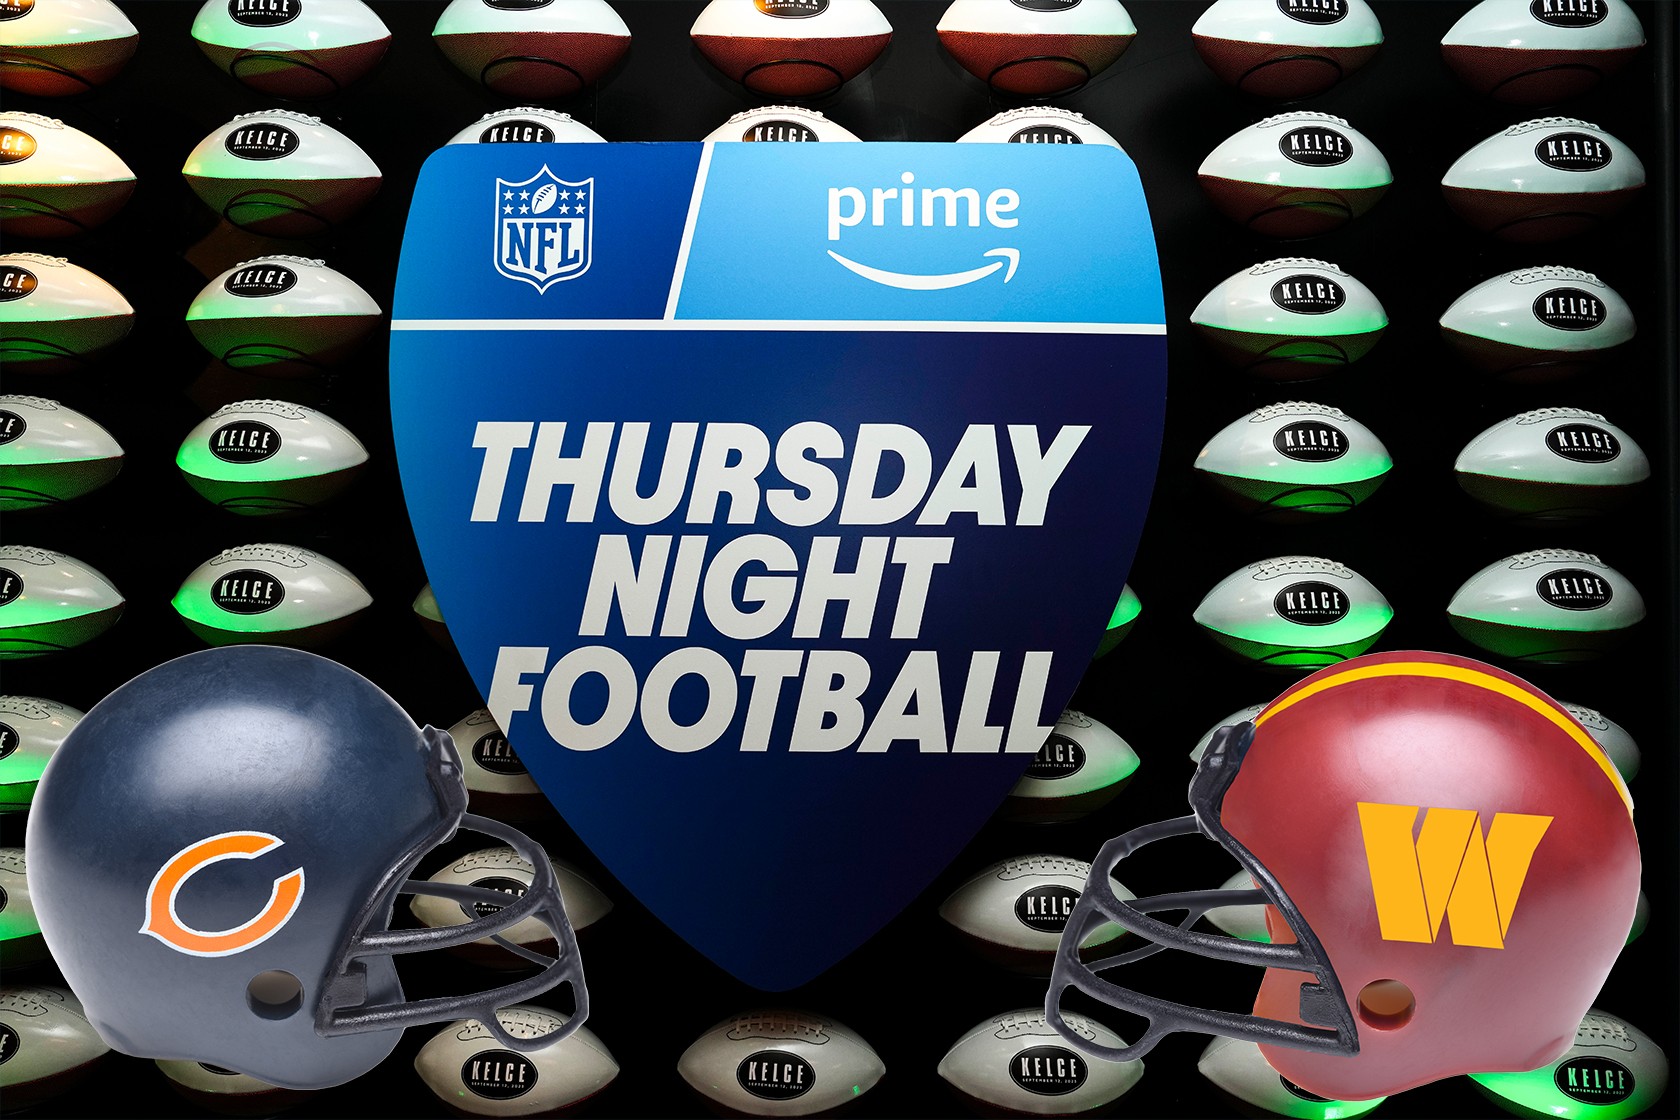 Who is playing Thursday Night Football? How to watch.